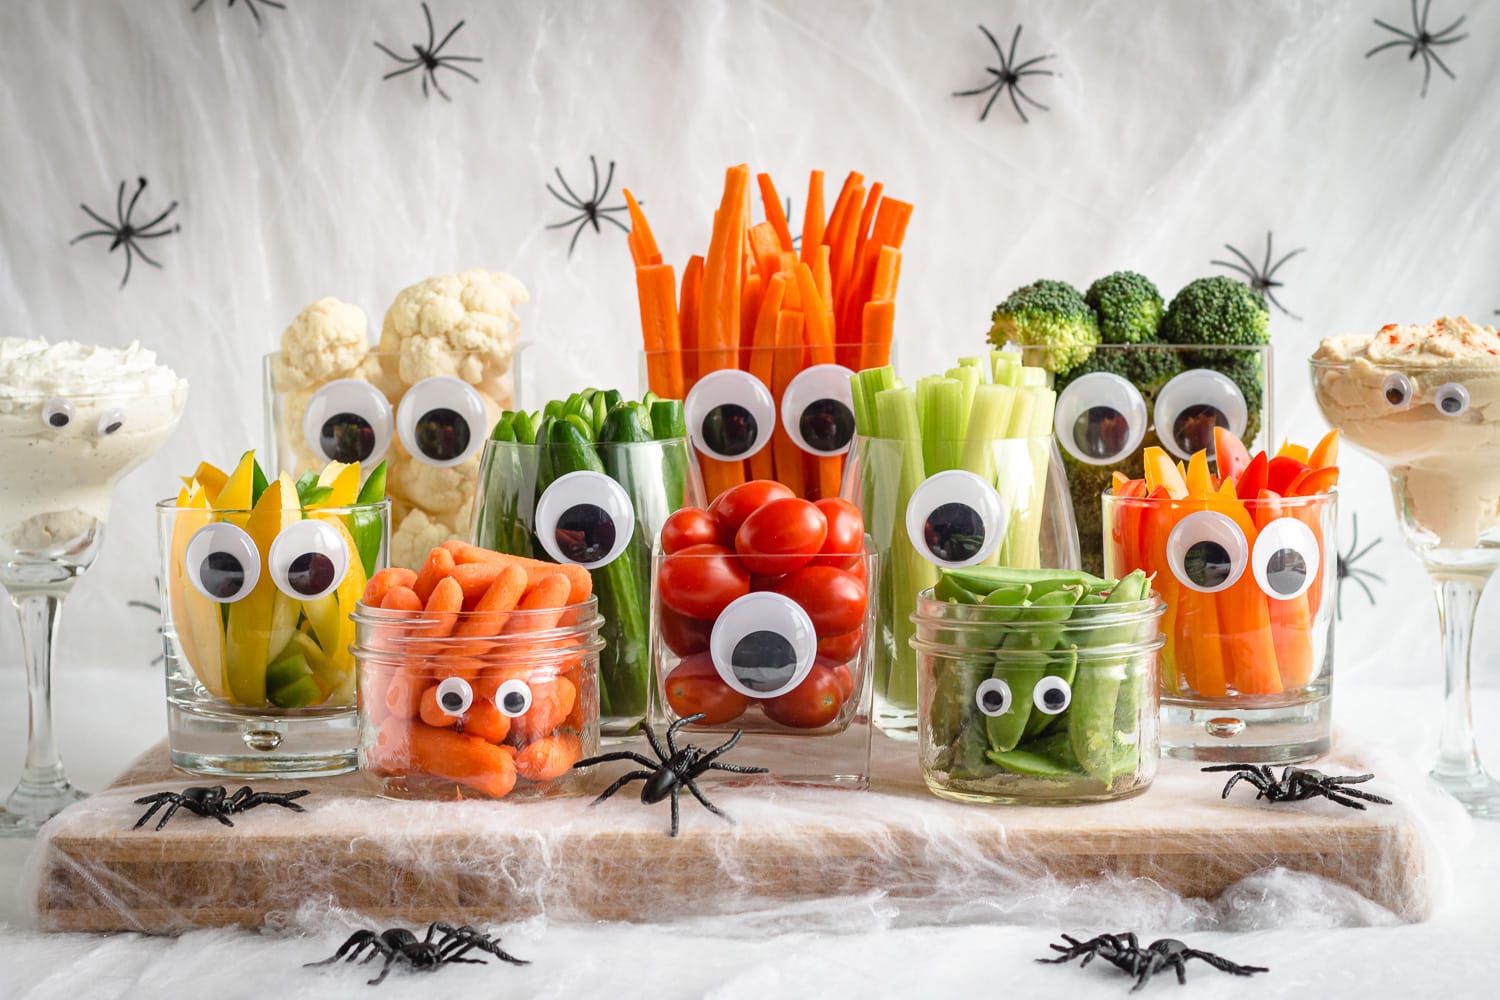 Large Halloween themed veggie tray made using glassware and googly eyes surrounded by fake spiders and cobwebs.